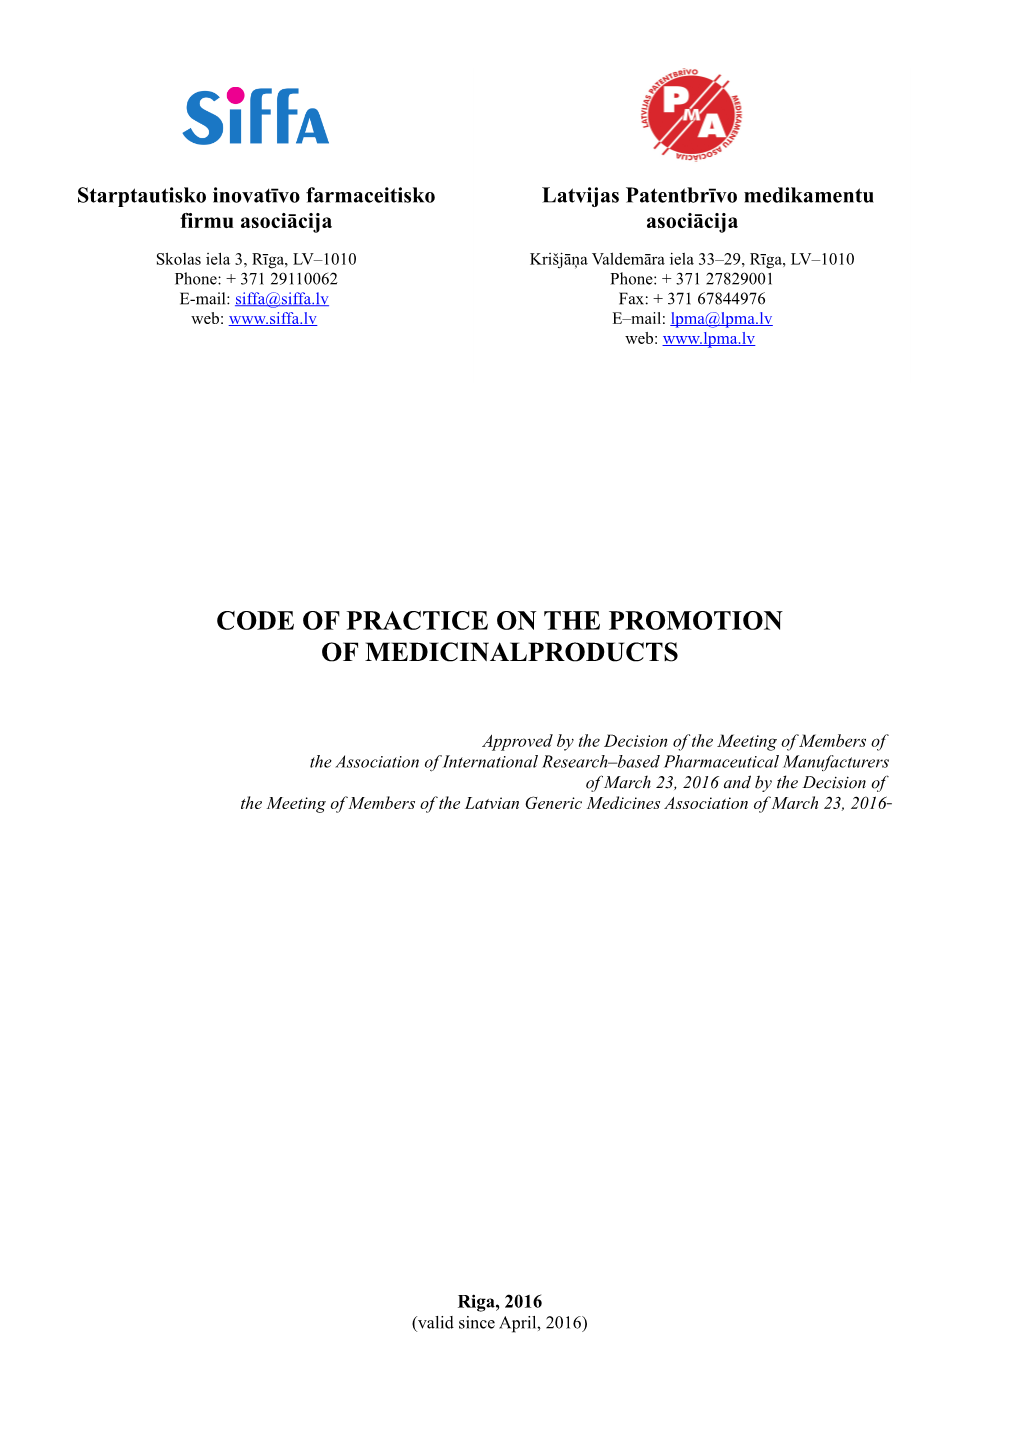 Code of Practice on the Promotion